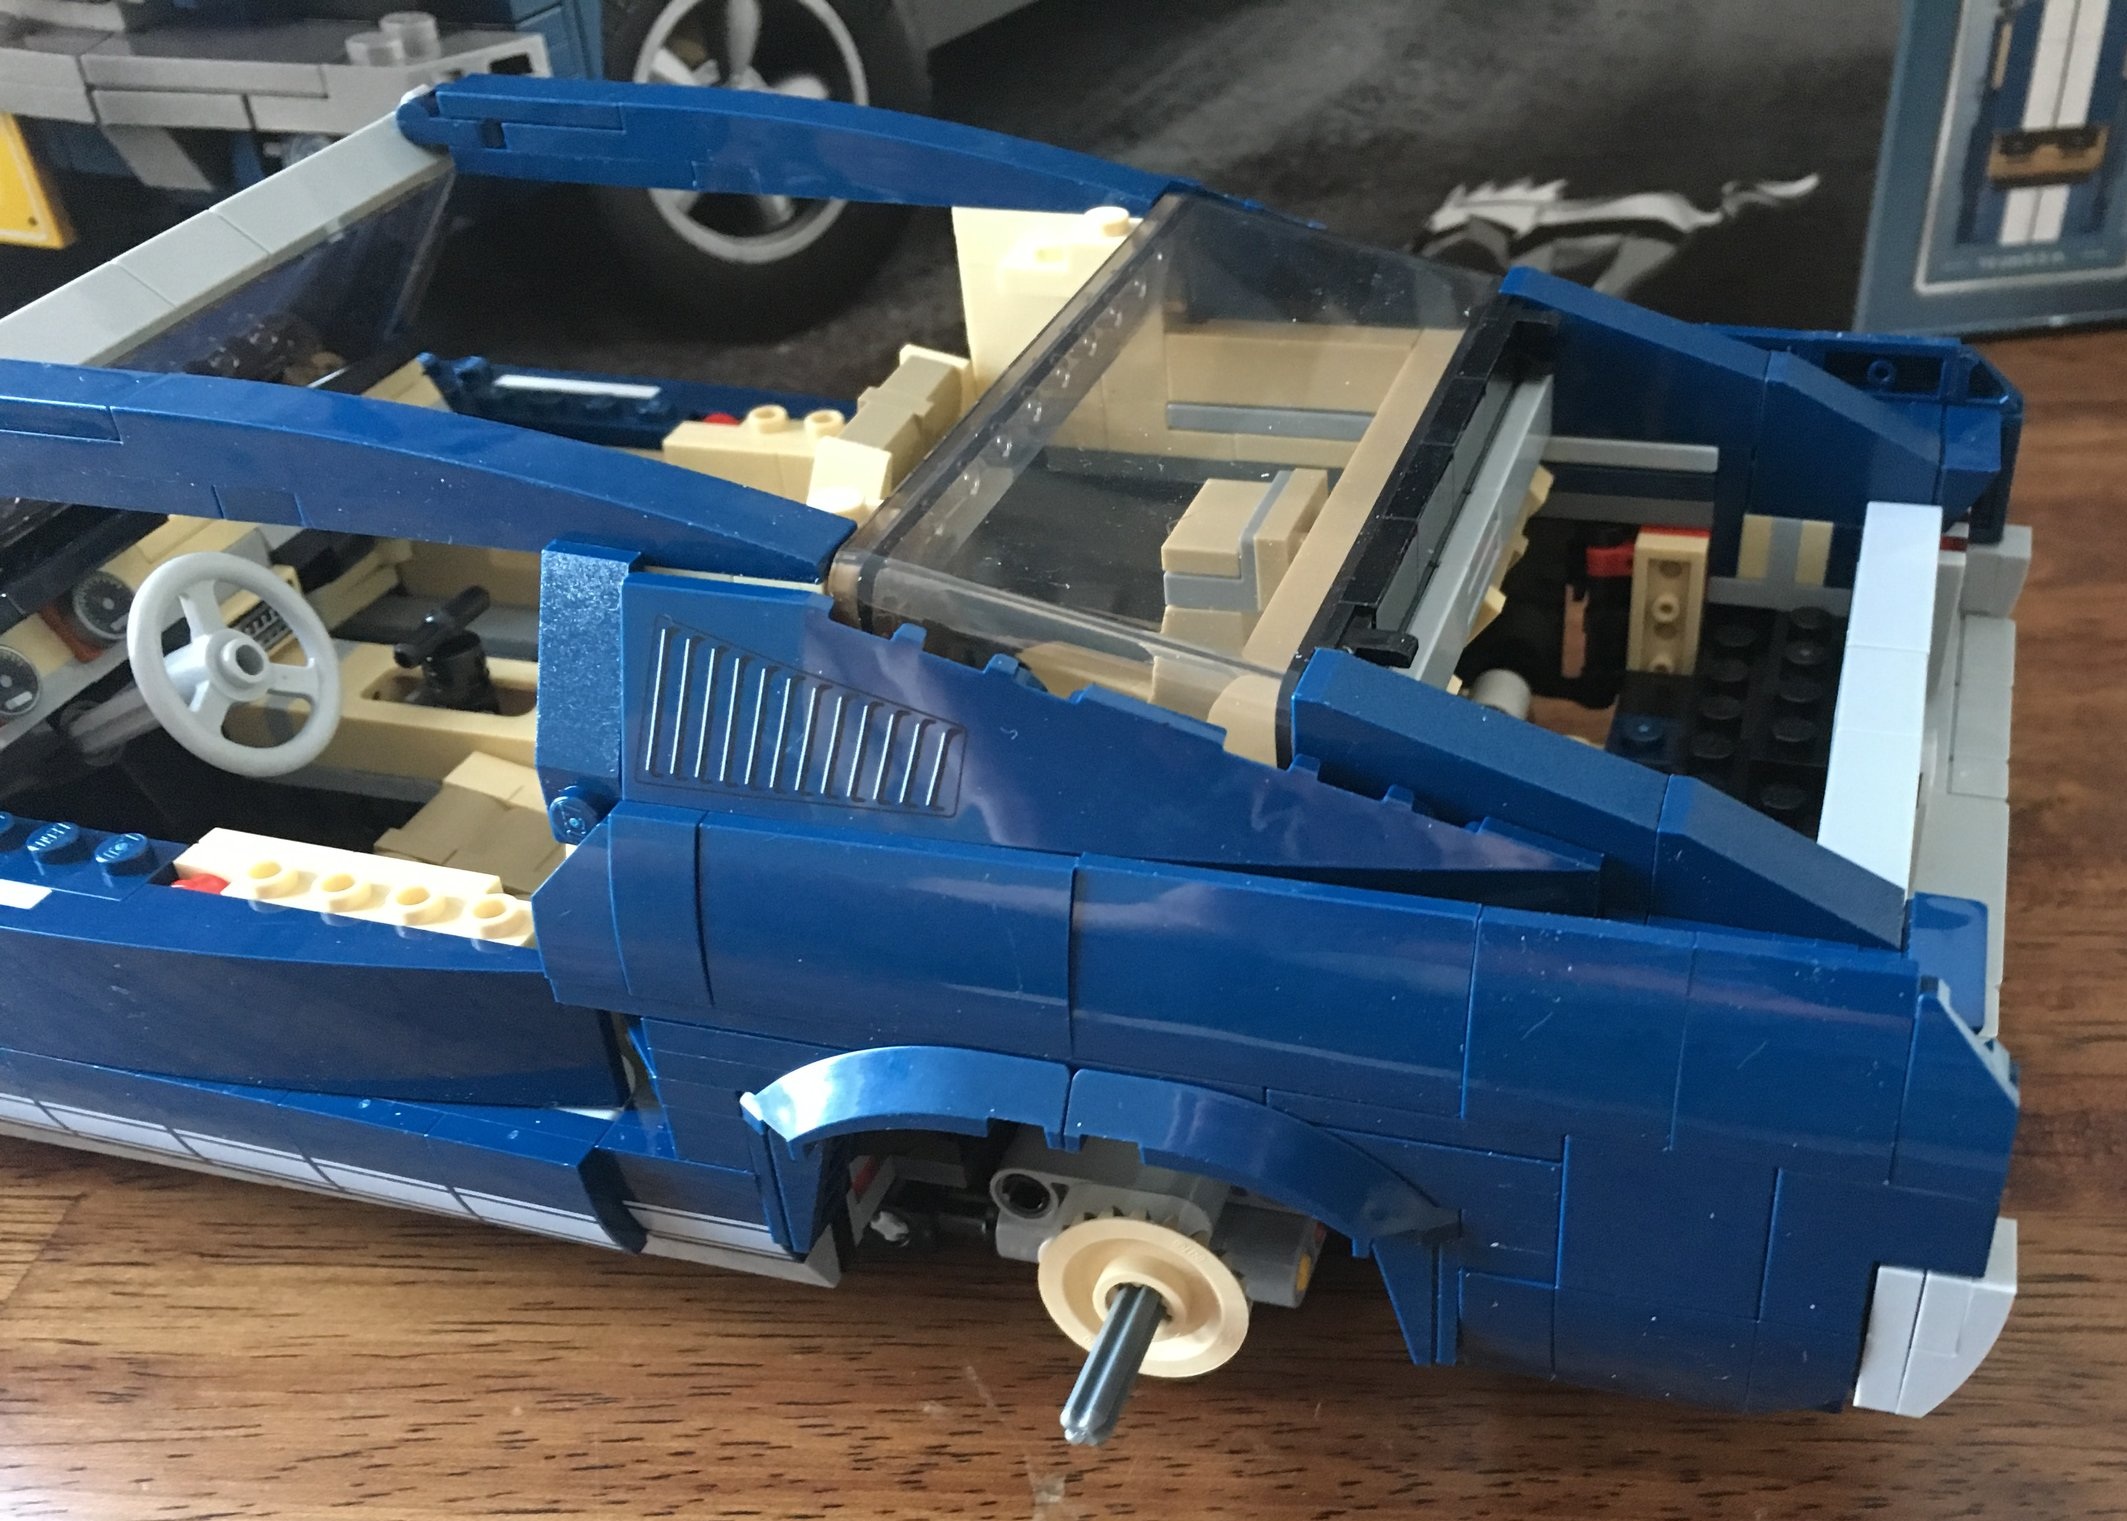 LEGO® Creator review: 10265 Ford Mustang  New Elementary: LEGO® parts,  sets and techniques